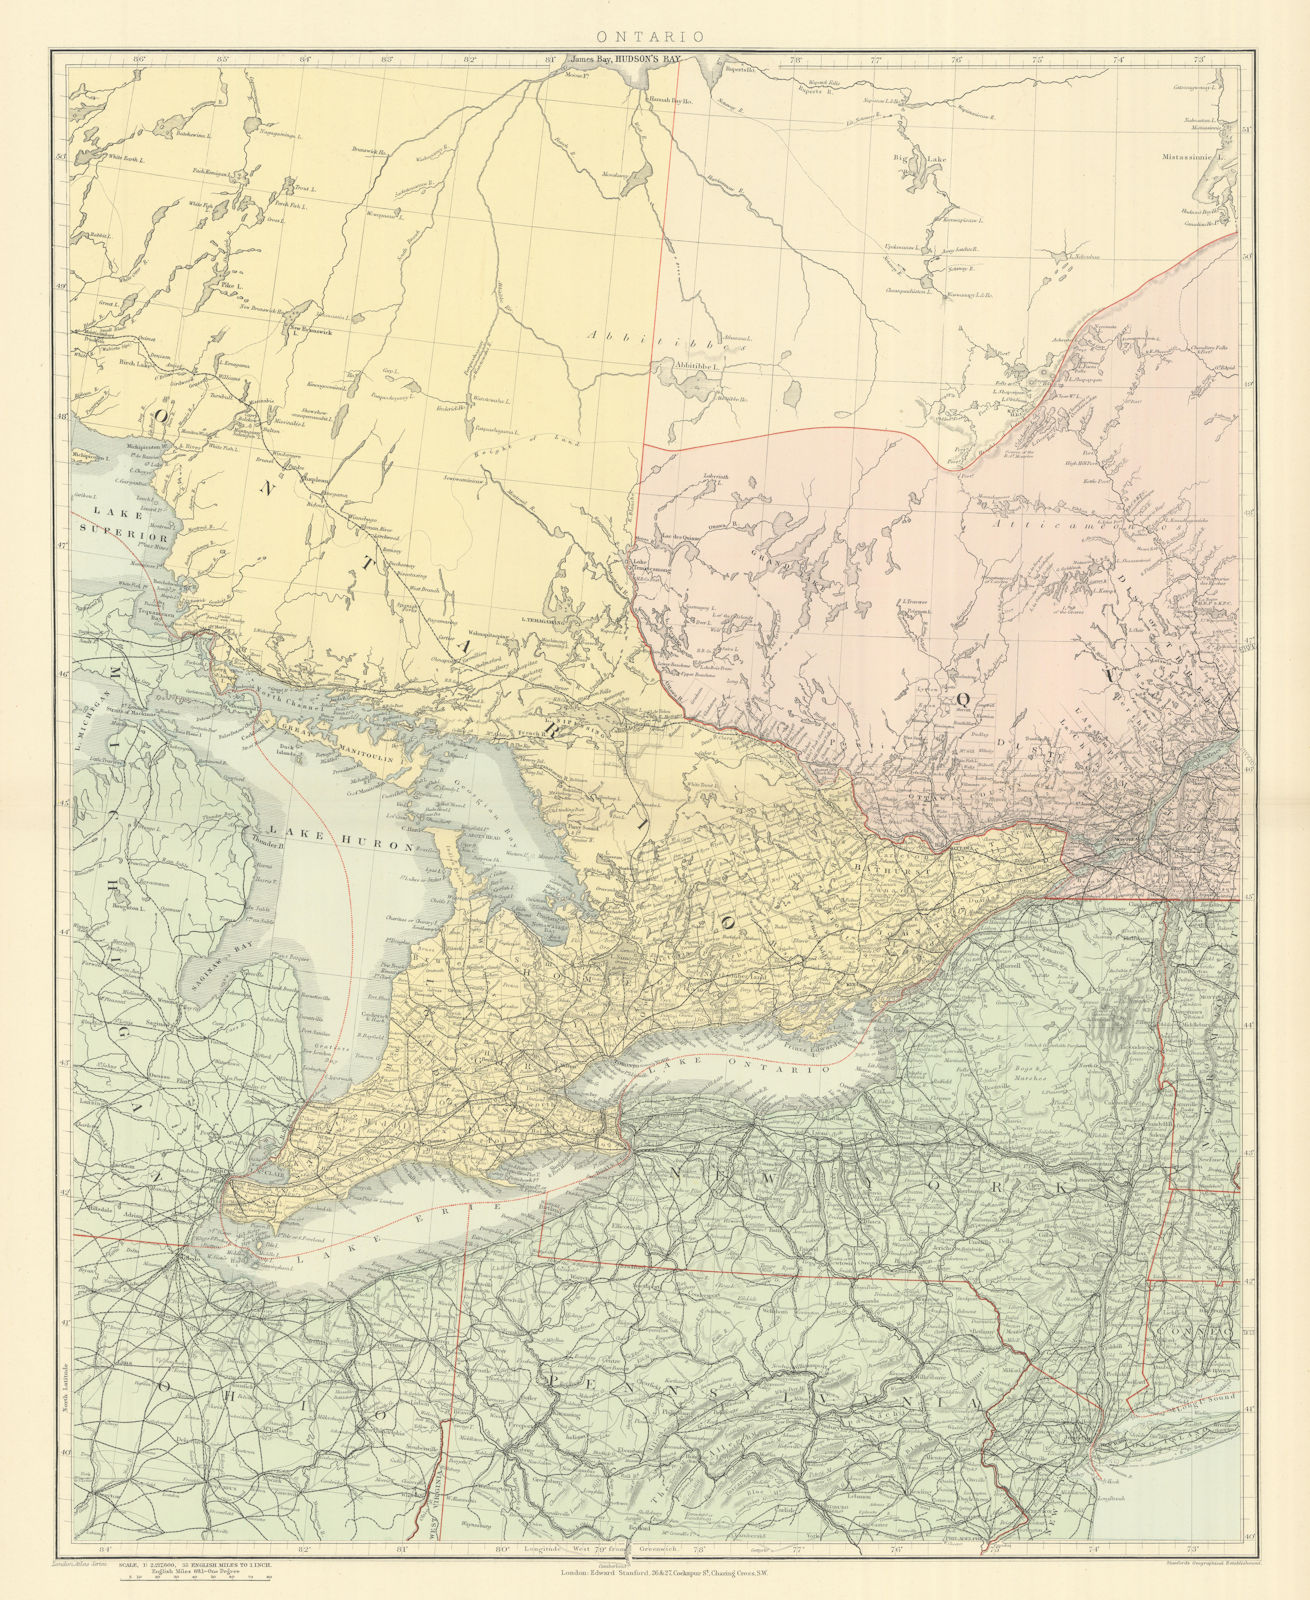 Associate Product Southern Ontario. Lake Huron Erie. New York state. Great Lakes STANFORD 1894 map